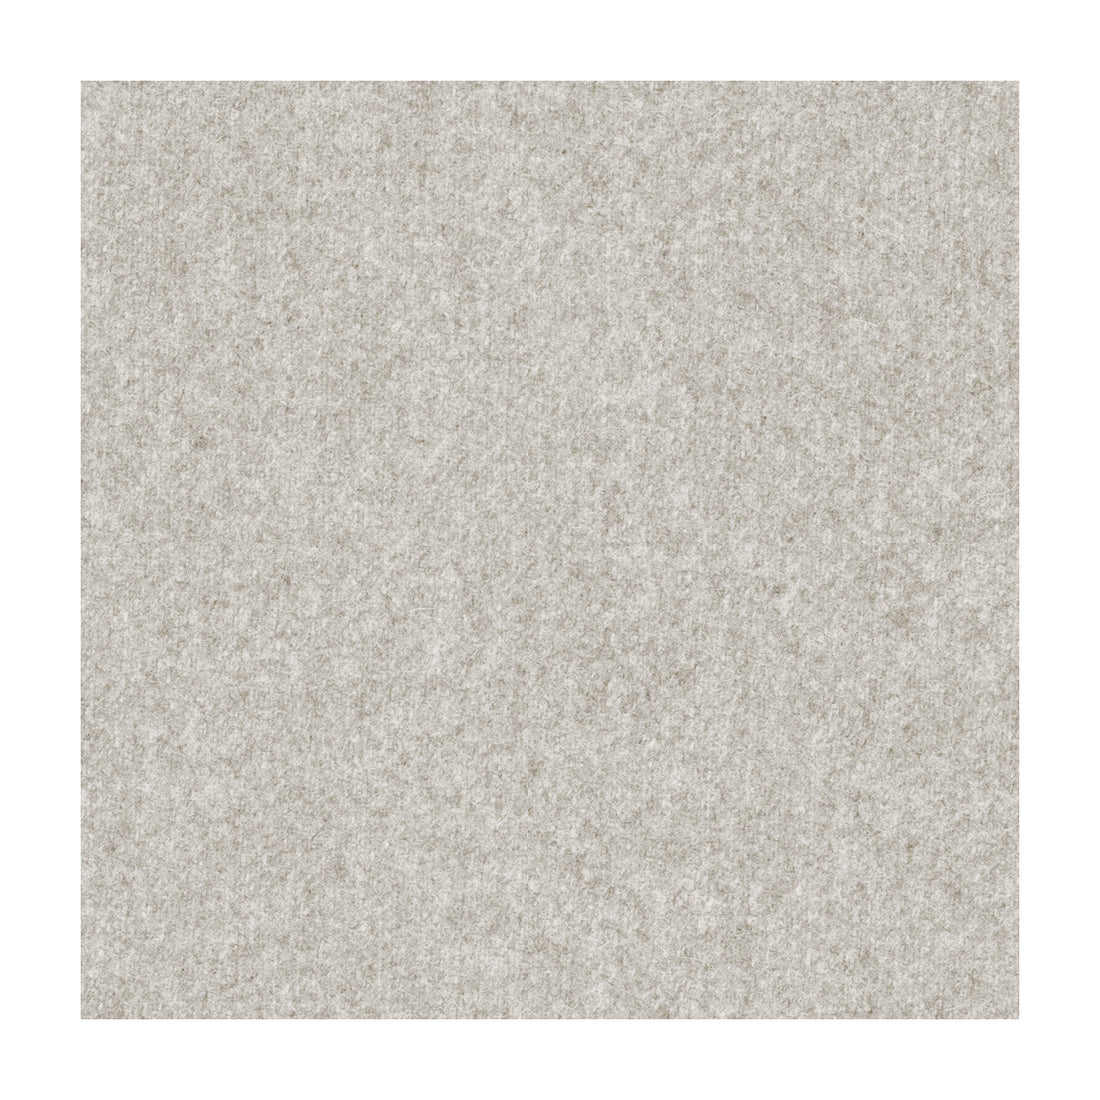 Jefferson Wool fabric in moonbeam color - pattern 34397.11.0 - by Kravet Contract